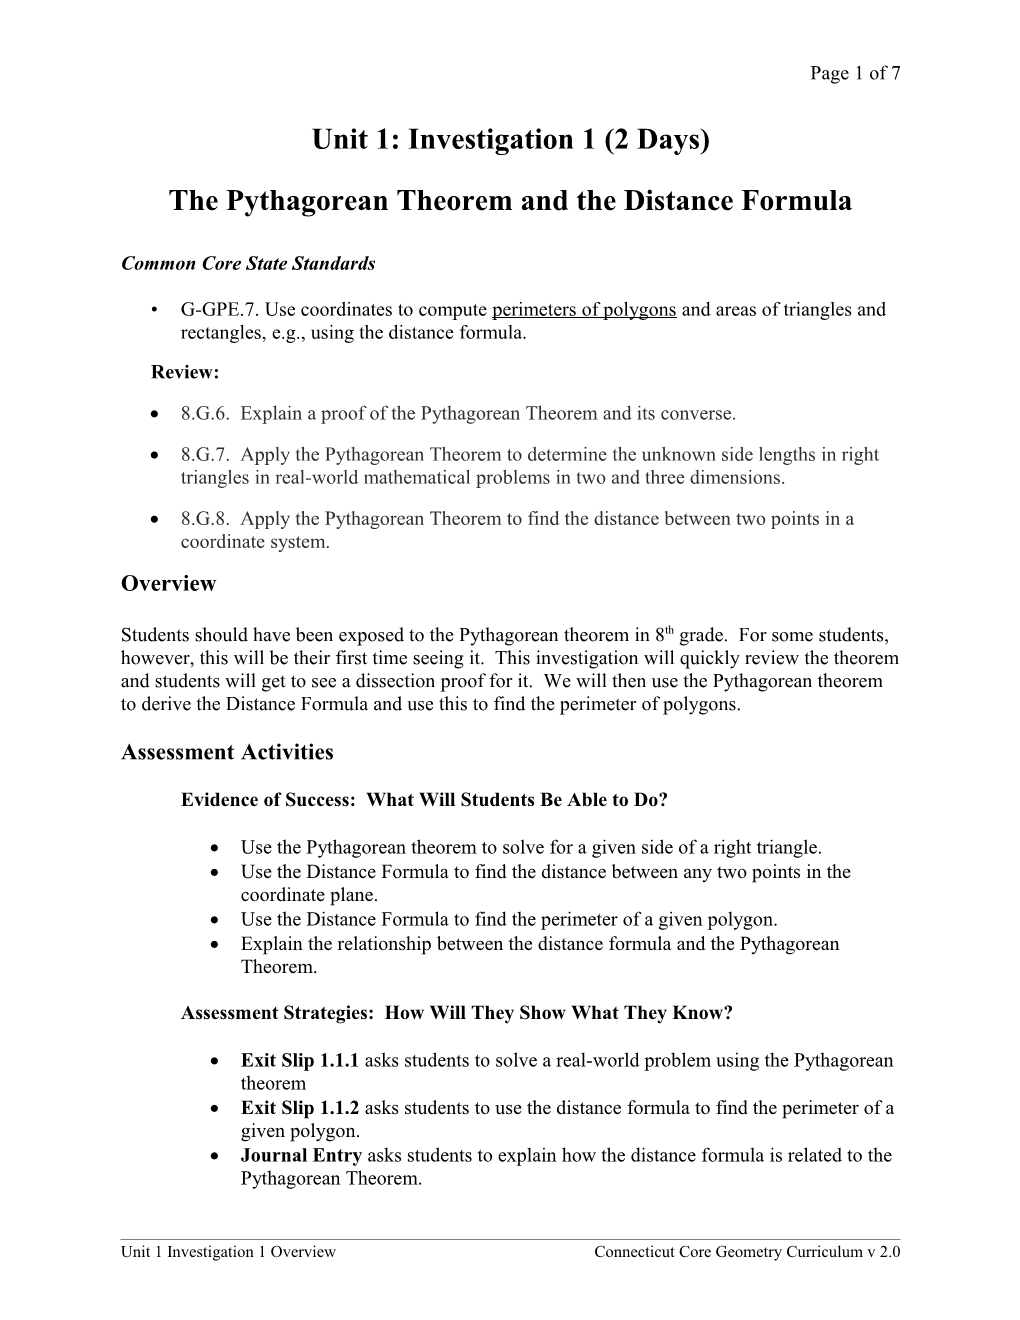 The Pythagorean Theorem and the Distance Formula